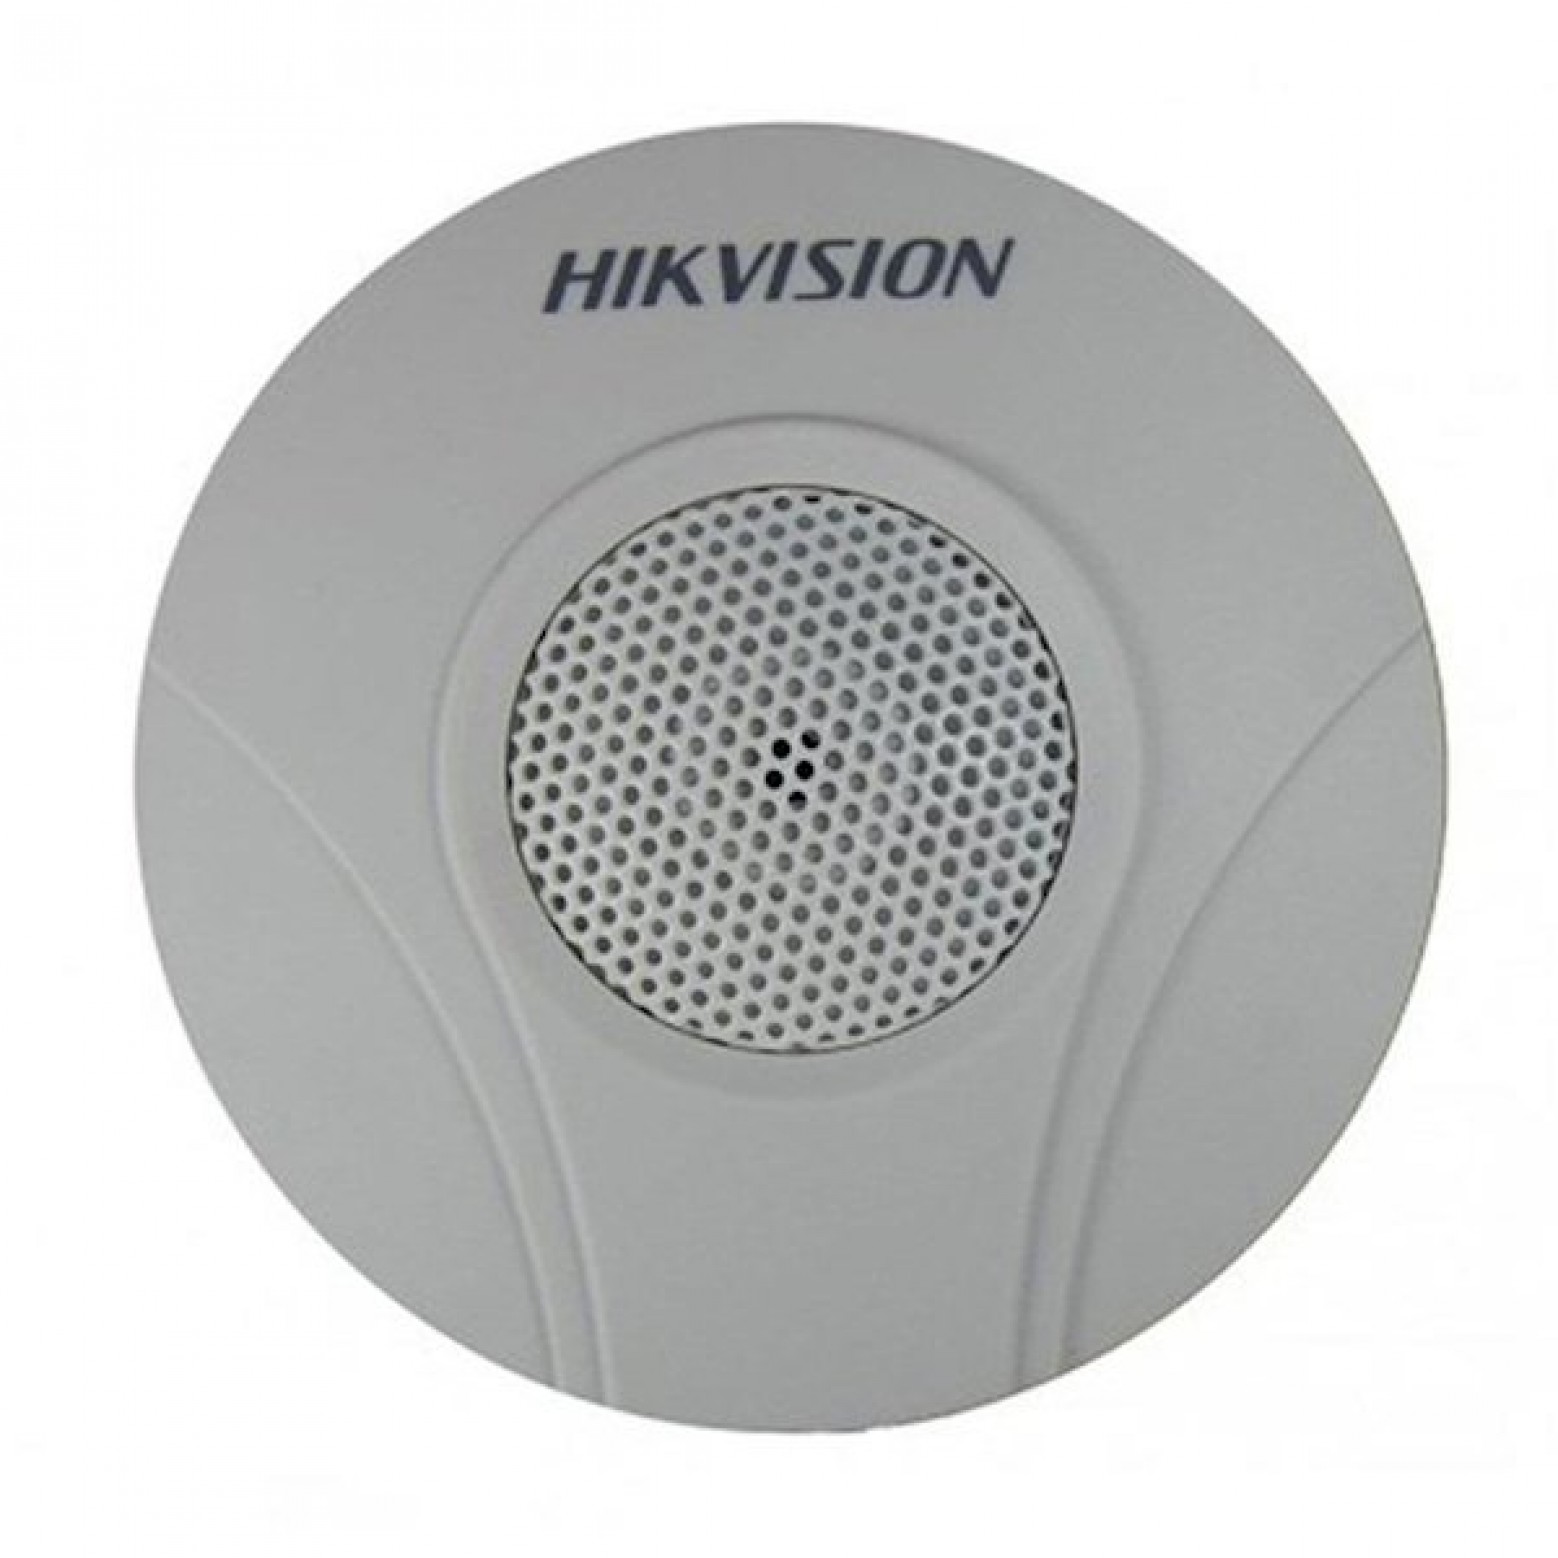 Microphone Hikvision DS-2FP2020